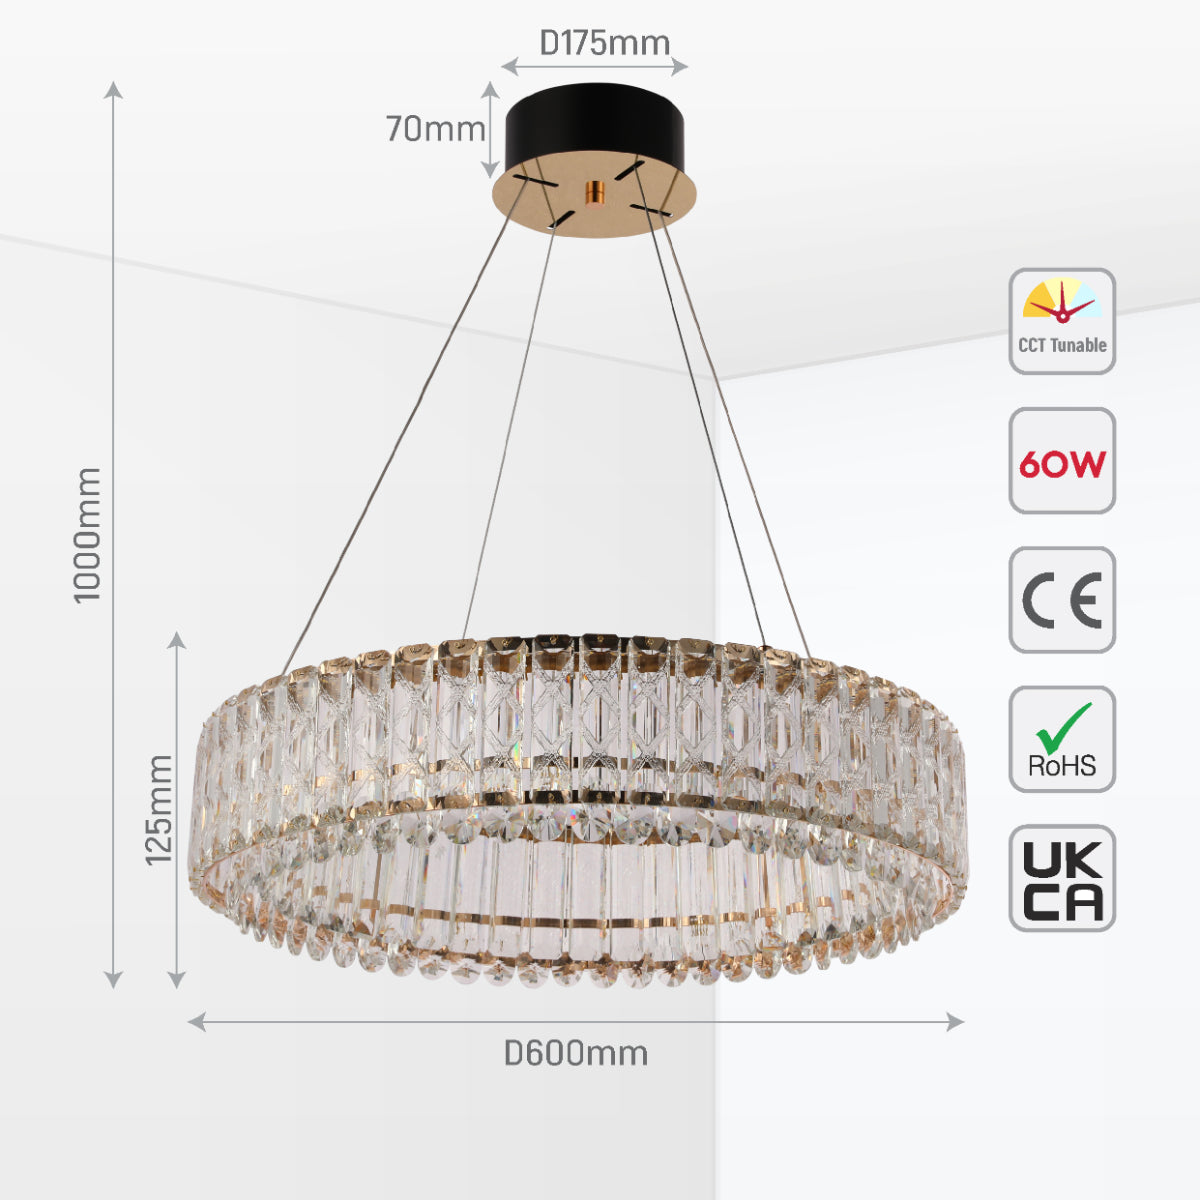 Size and certifications of Crystal Gold Pendant Chandelier Light with Remote Control 159-18216